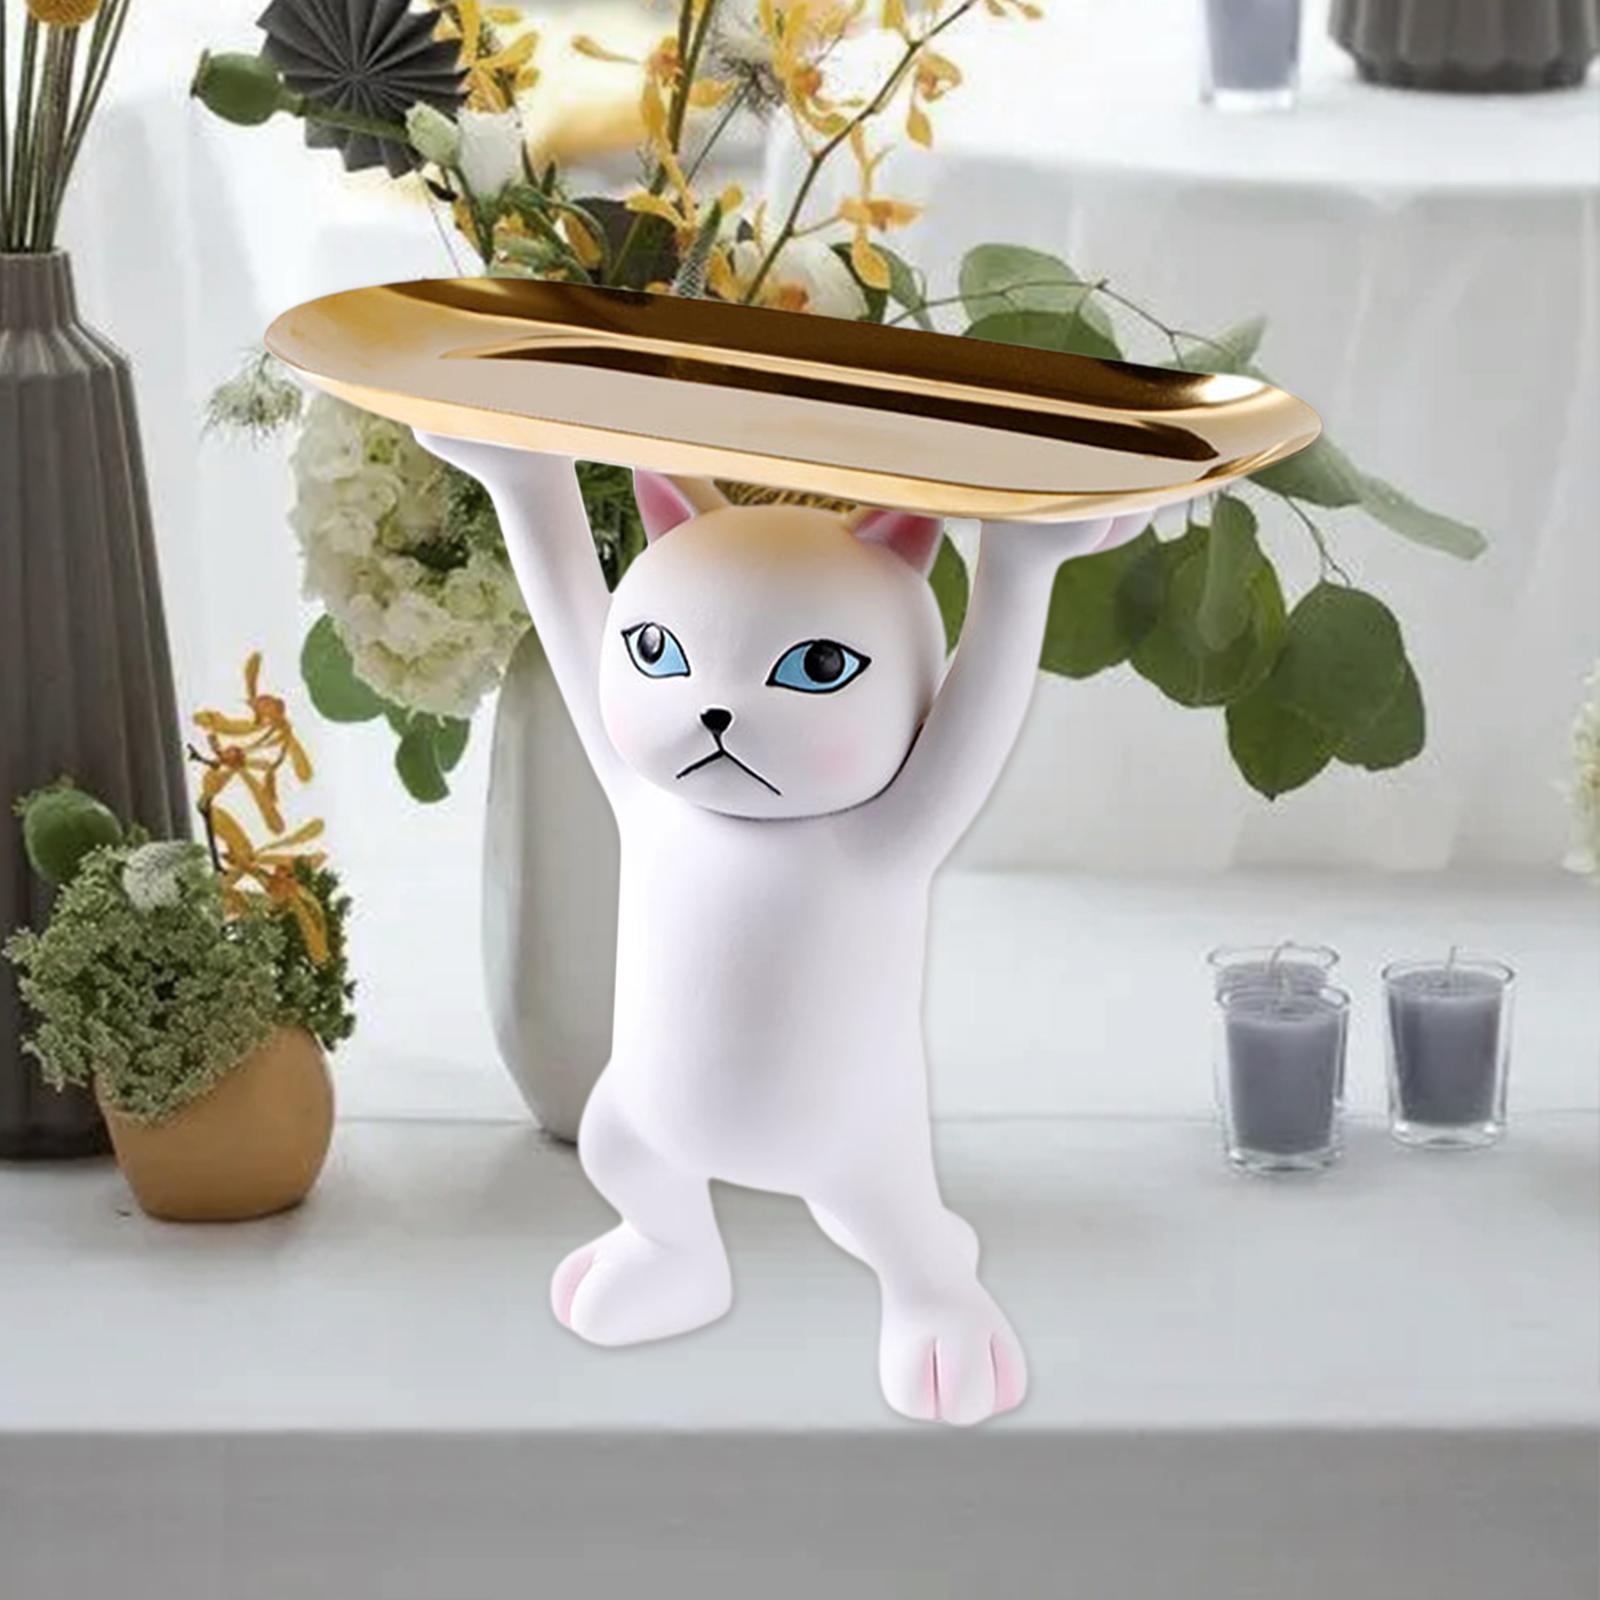 Cat Kitty Statue Home Decor Resin Animal with Item Placement Gift White